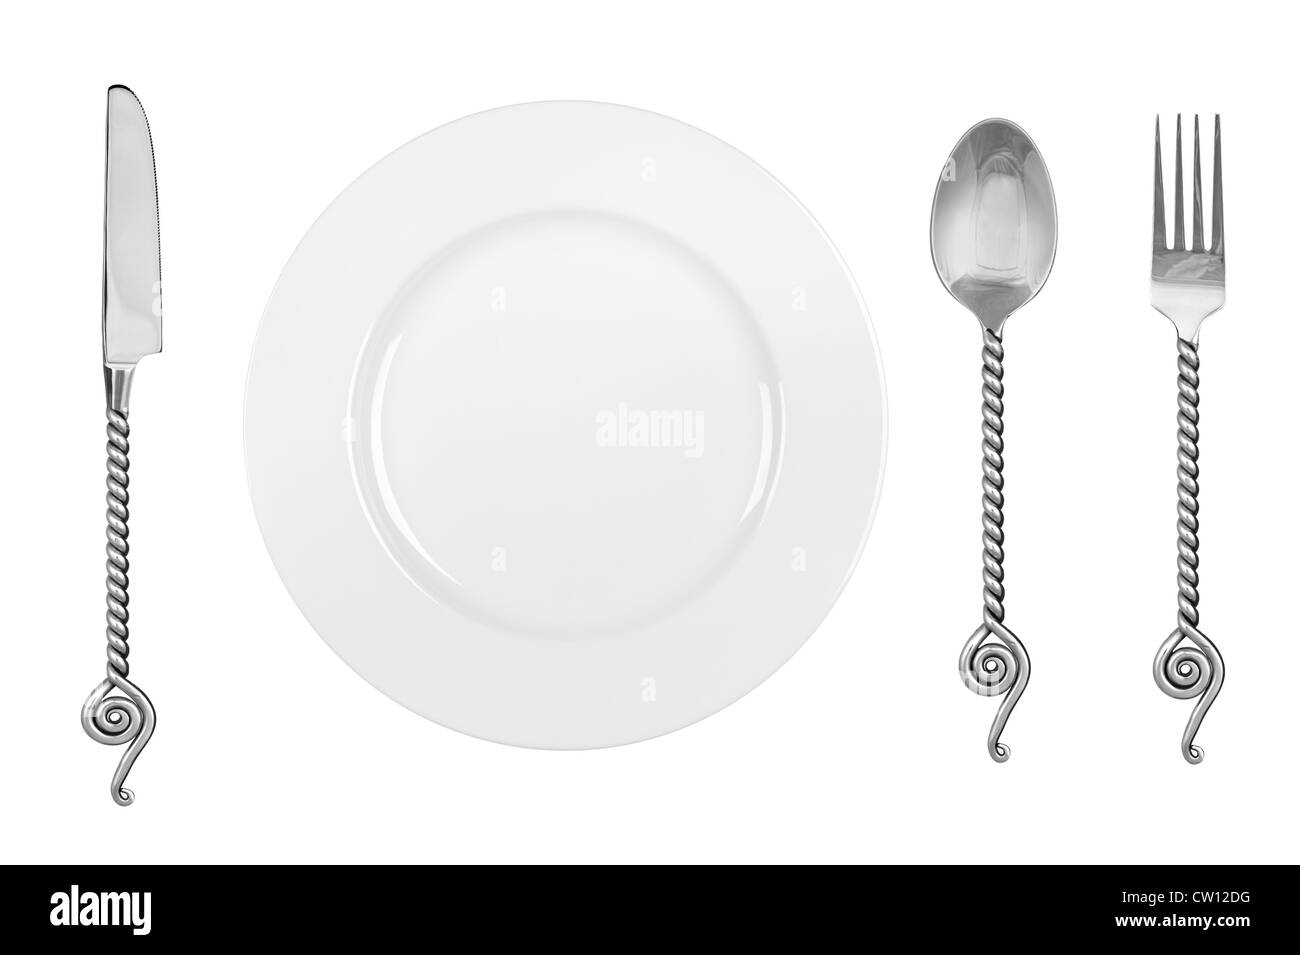 A table setting with a dinner plate, and fancy silverware consisting of a fork, knife and spoon. Stock Photo